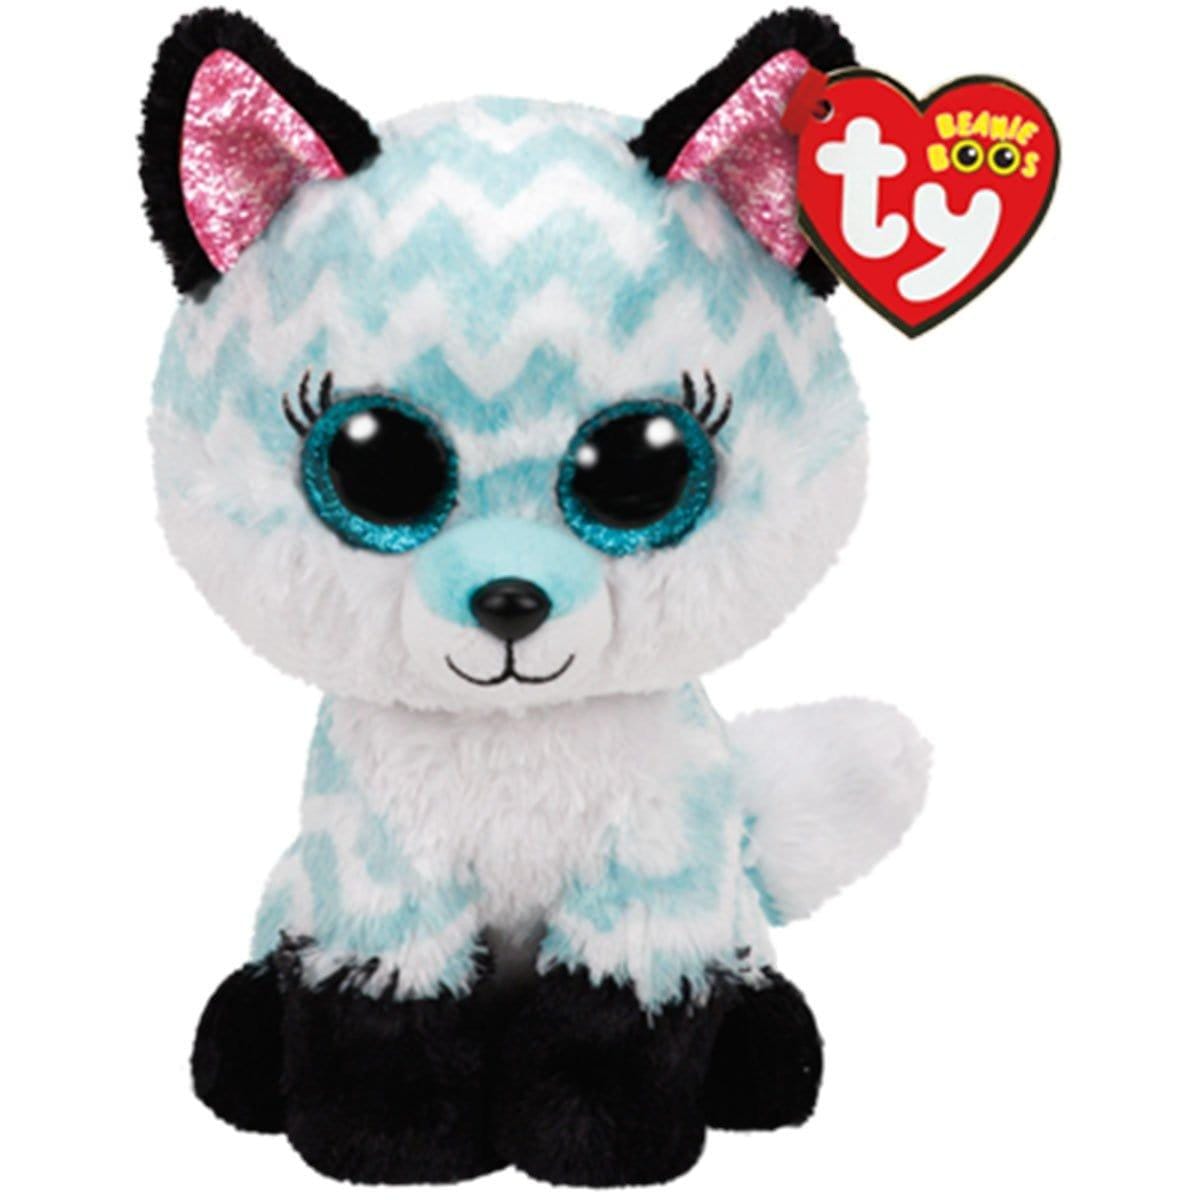 Buy Plushes Beanie Boo - Atlas sold at Party Expert